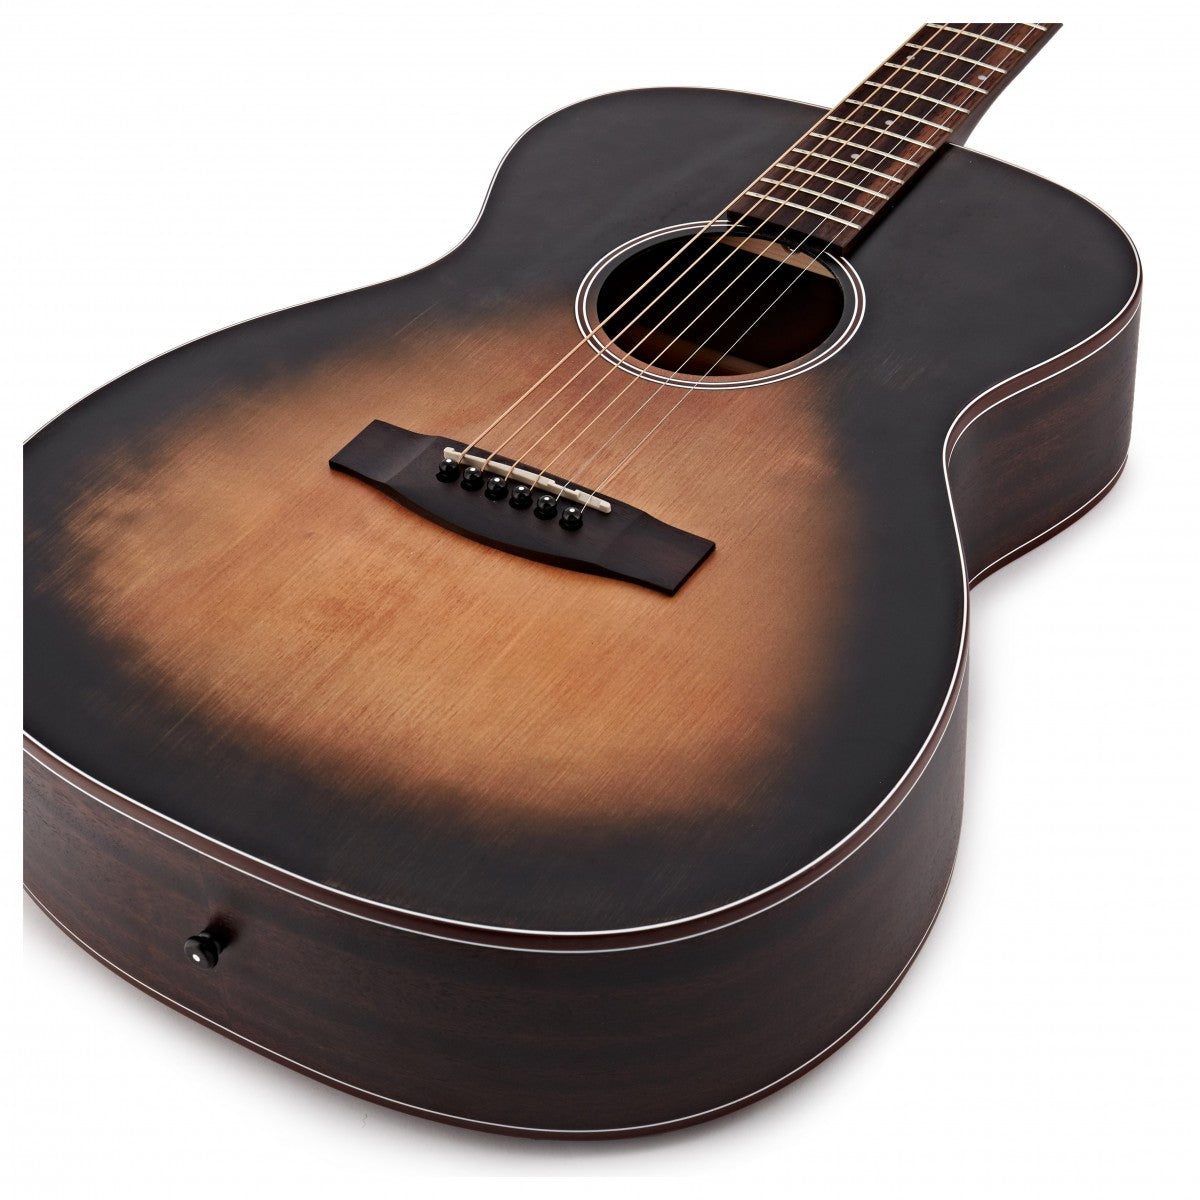 Aria 101DP Delta Player Orchestra Acoustic Guitar - Muddy Brown